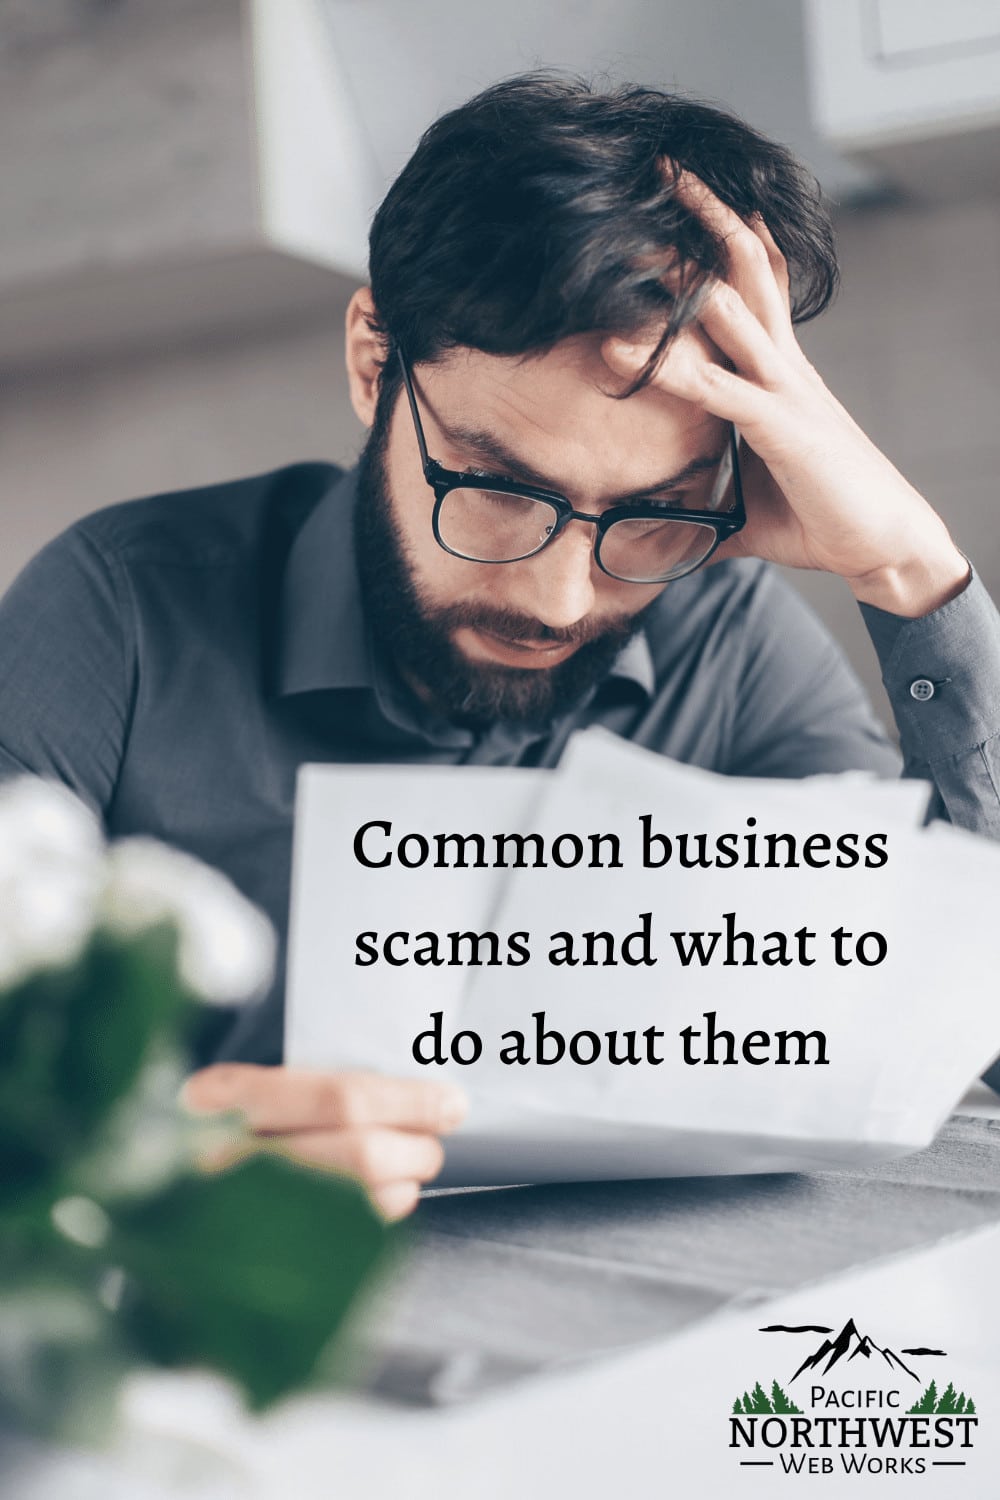 Common business scams and what to do about them